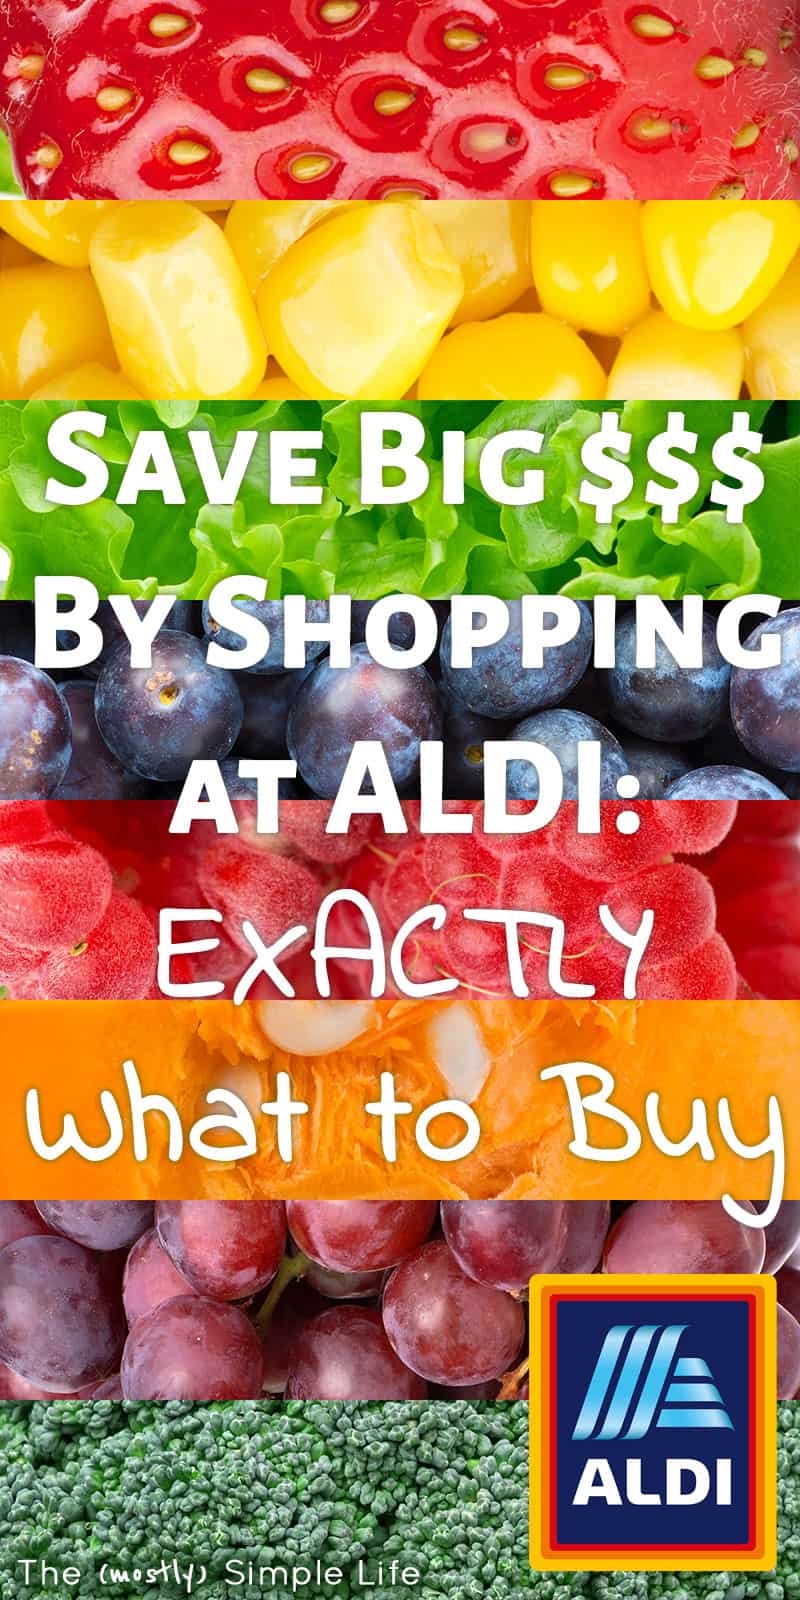 The Ultimate Guide to What to Buy at Aldi